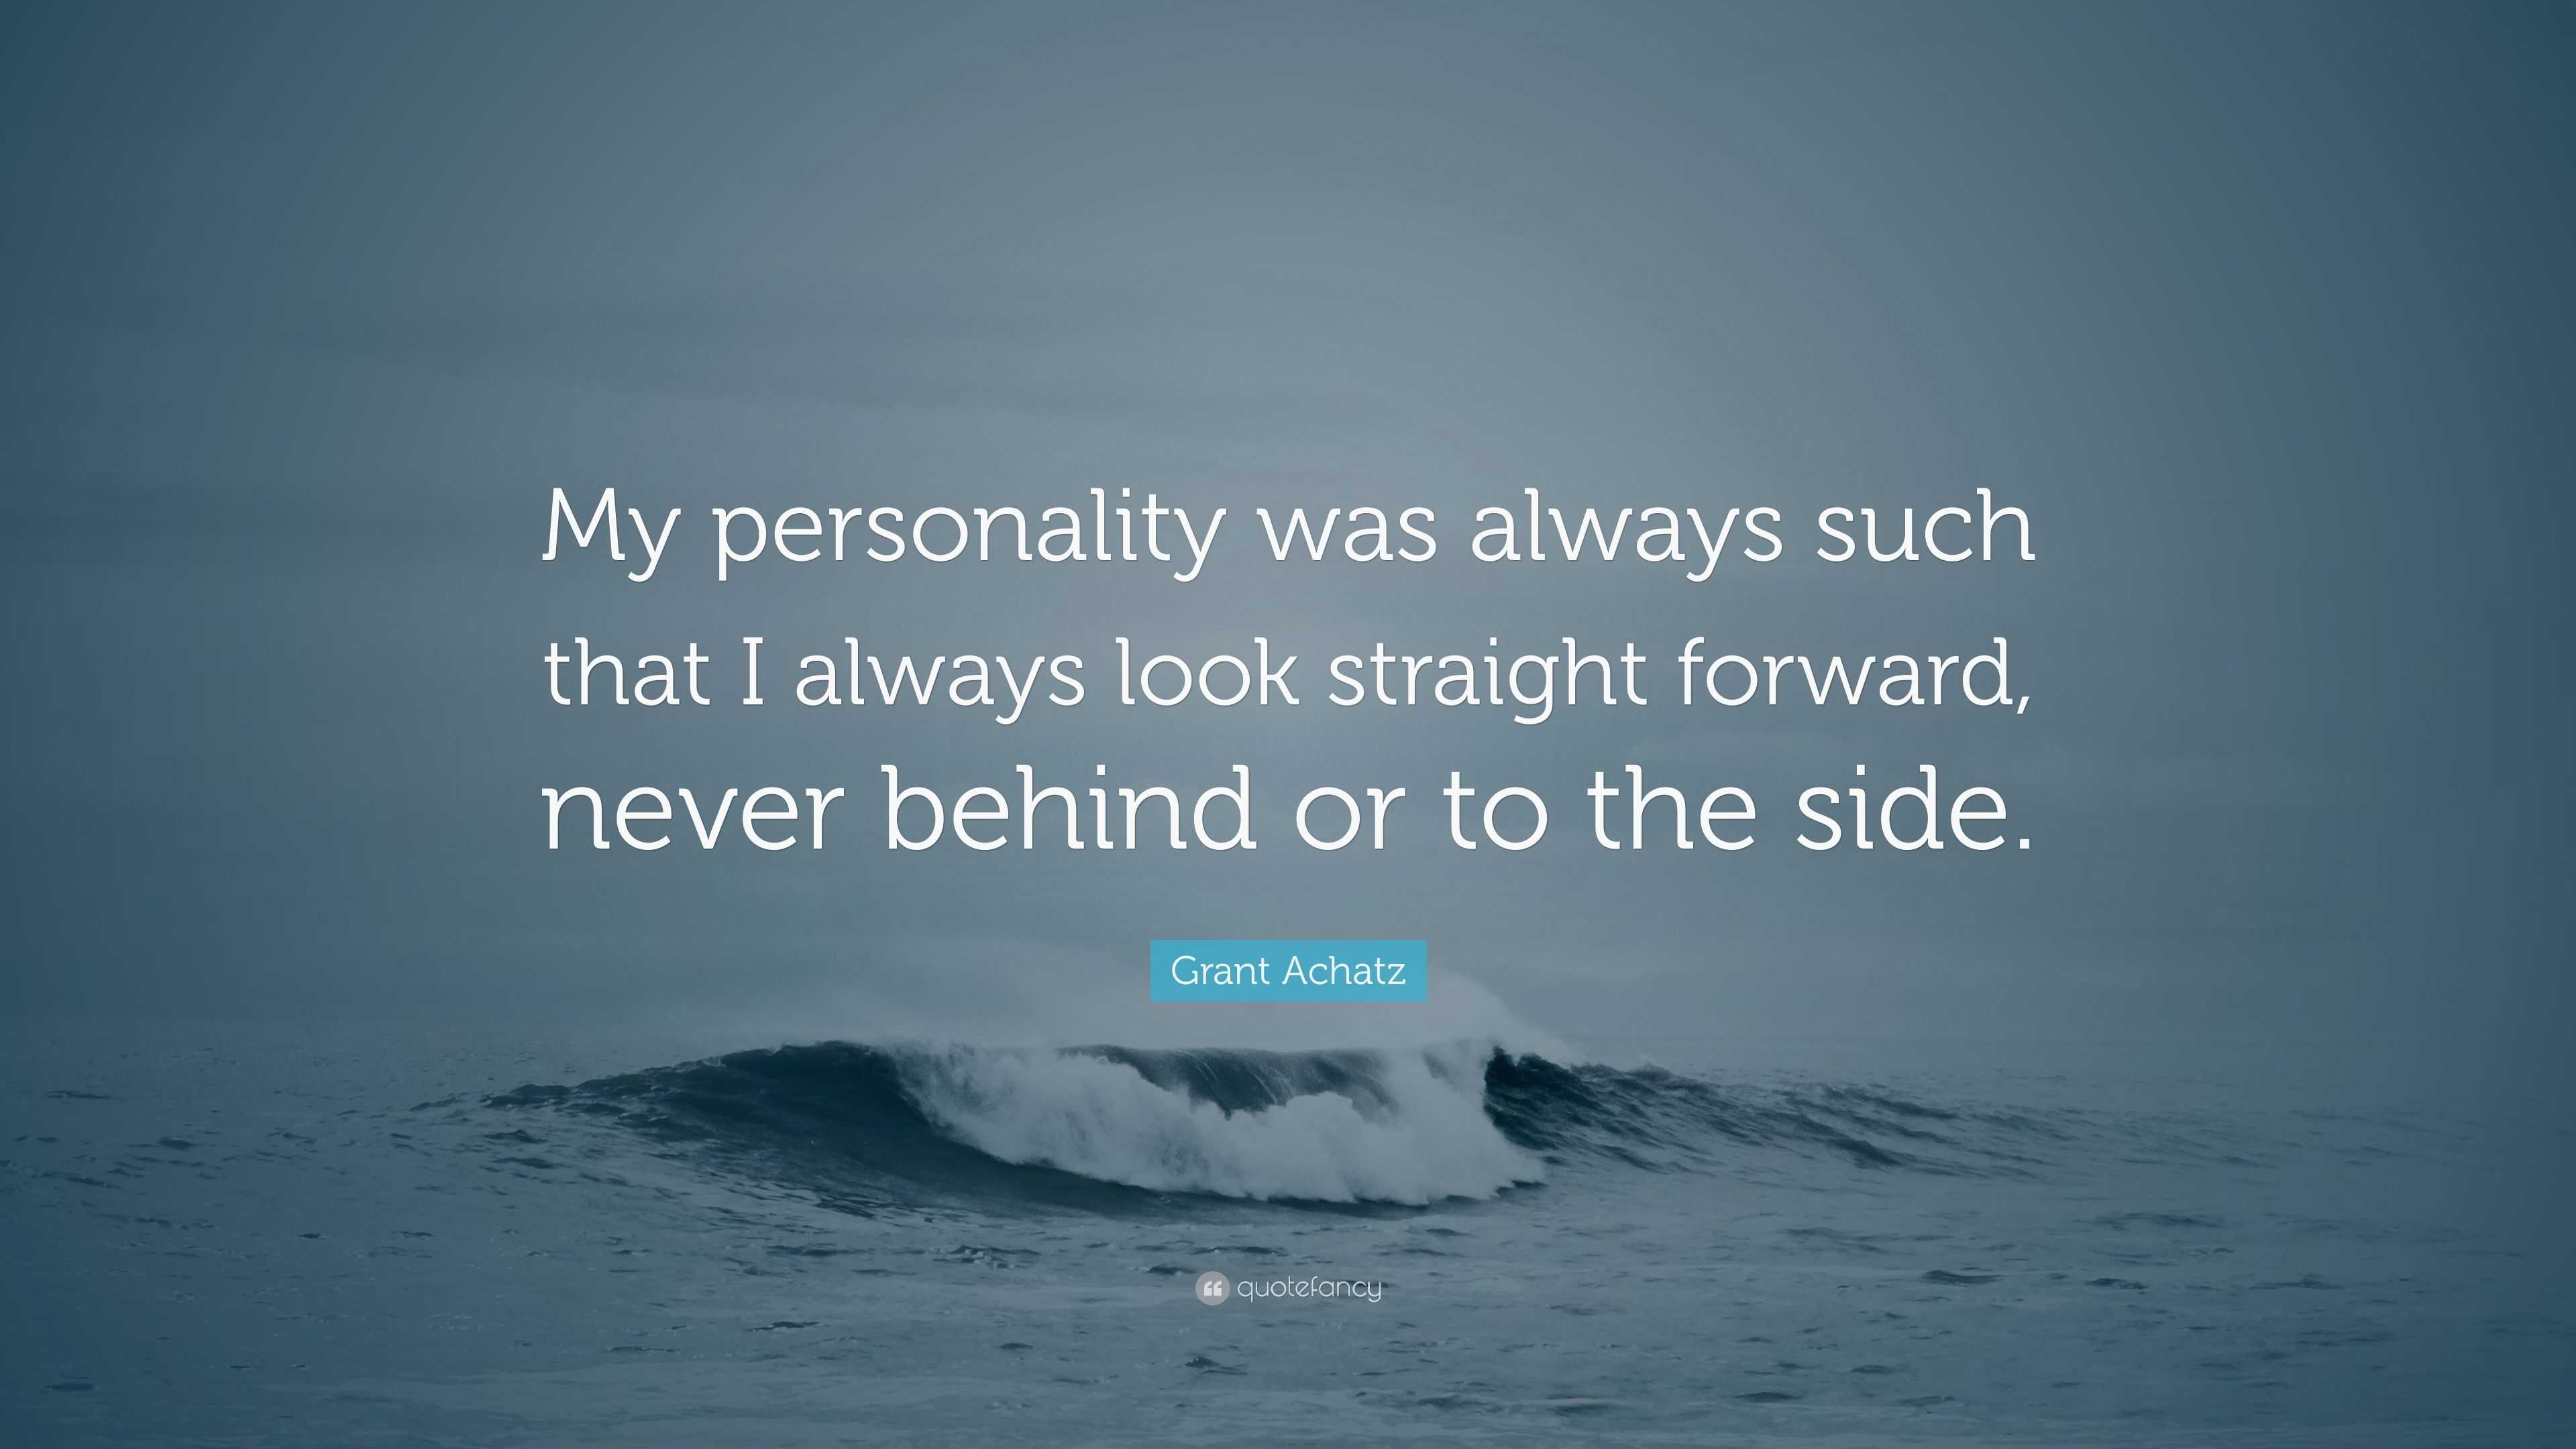 Grant Achatz Quote: “My personality was always such that I always look ...